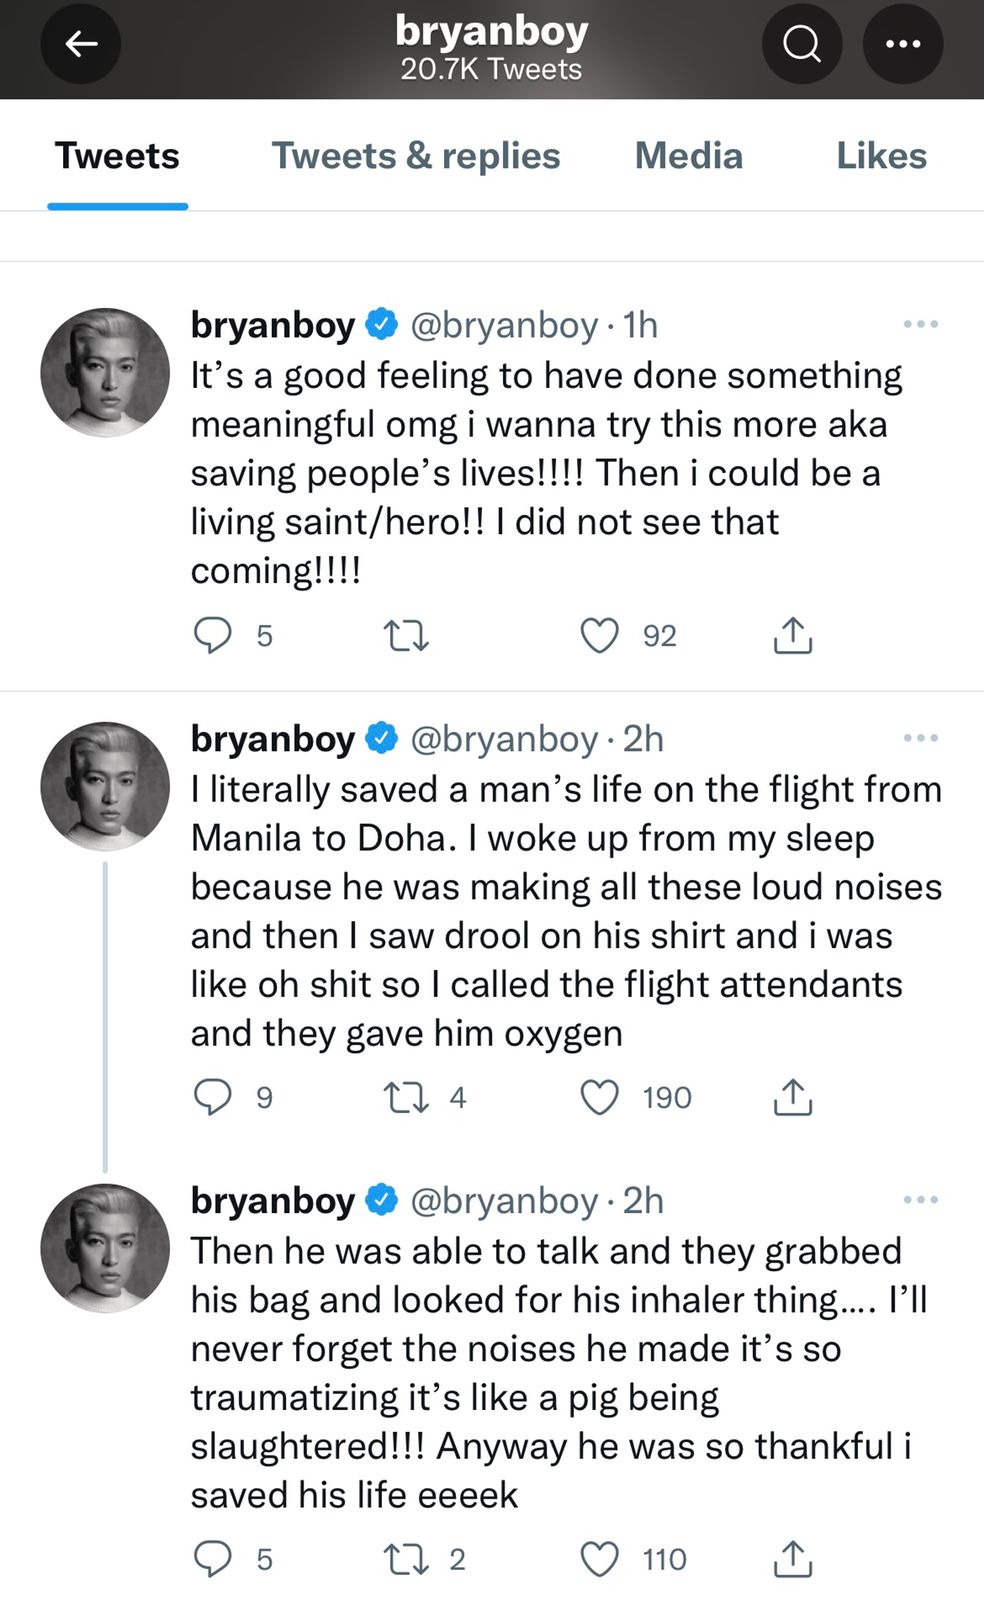 Bryanboy tweets about saving one's life